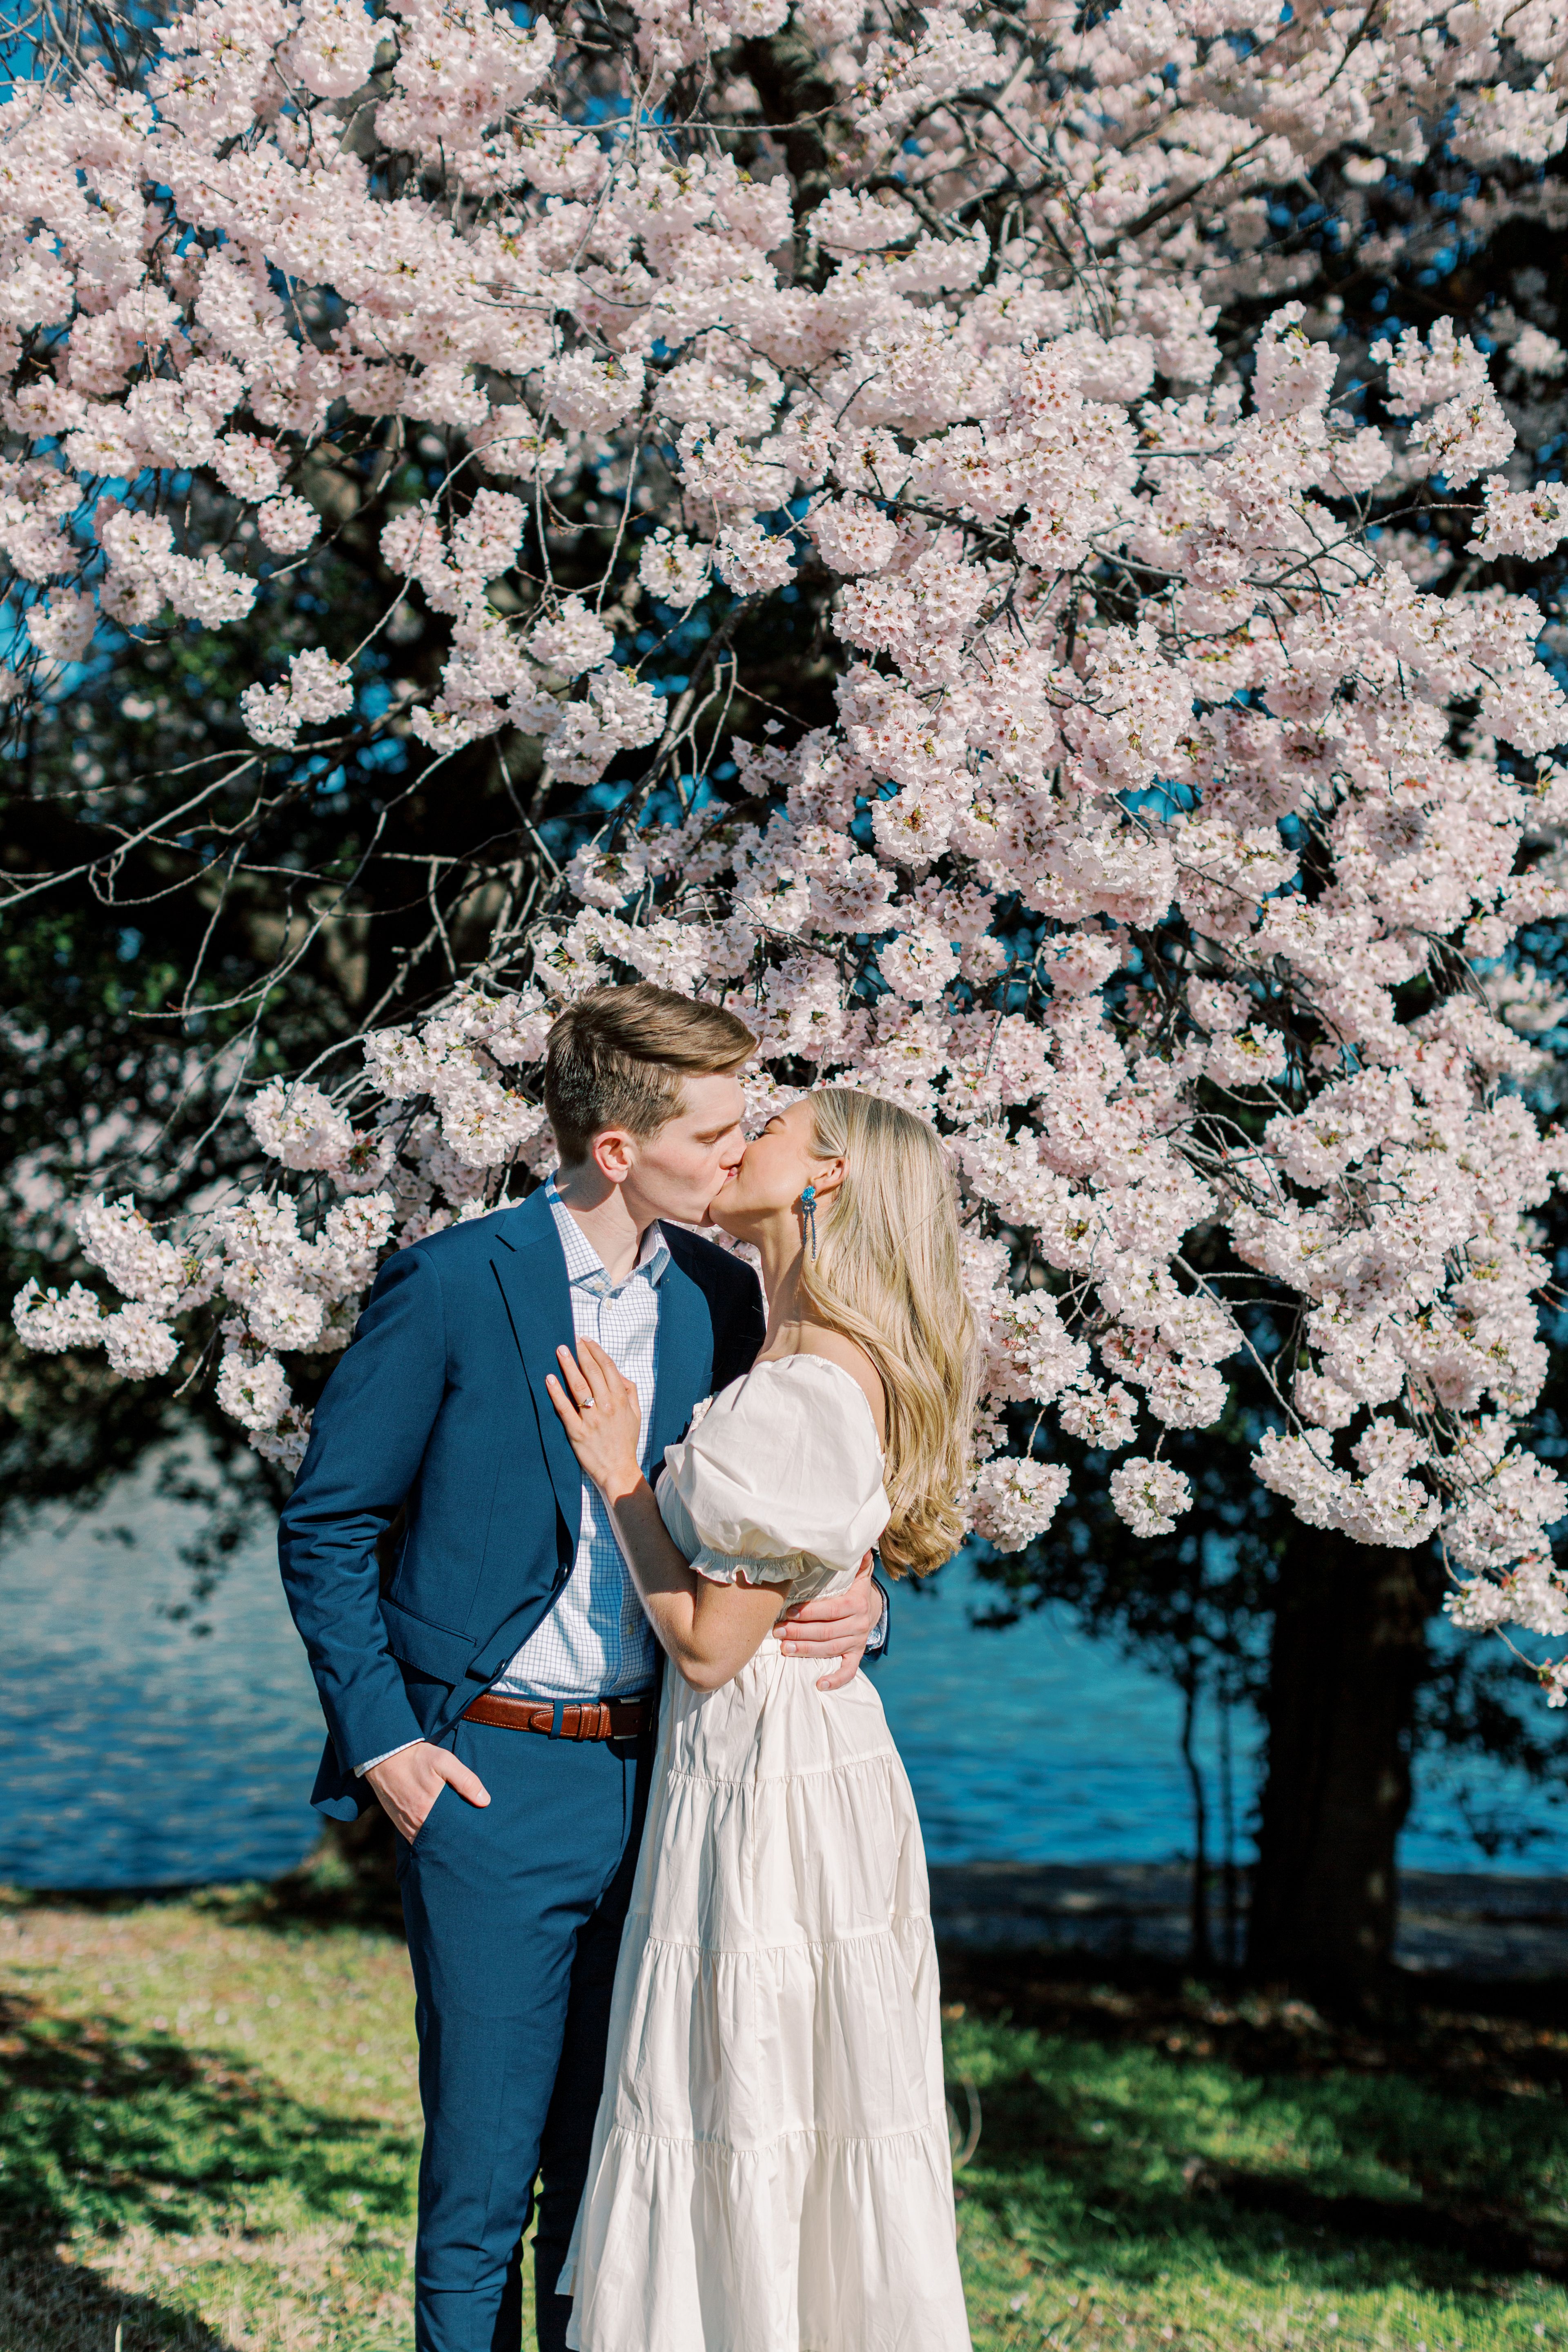 A couple kisses in front of cherry blossoms.